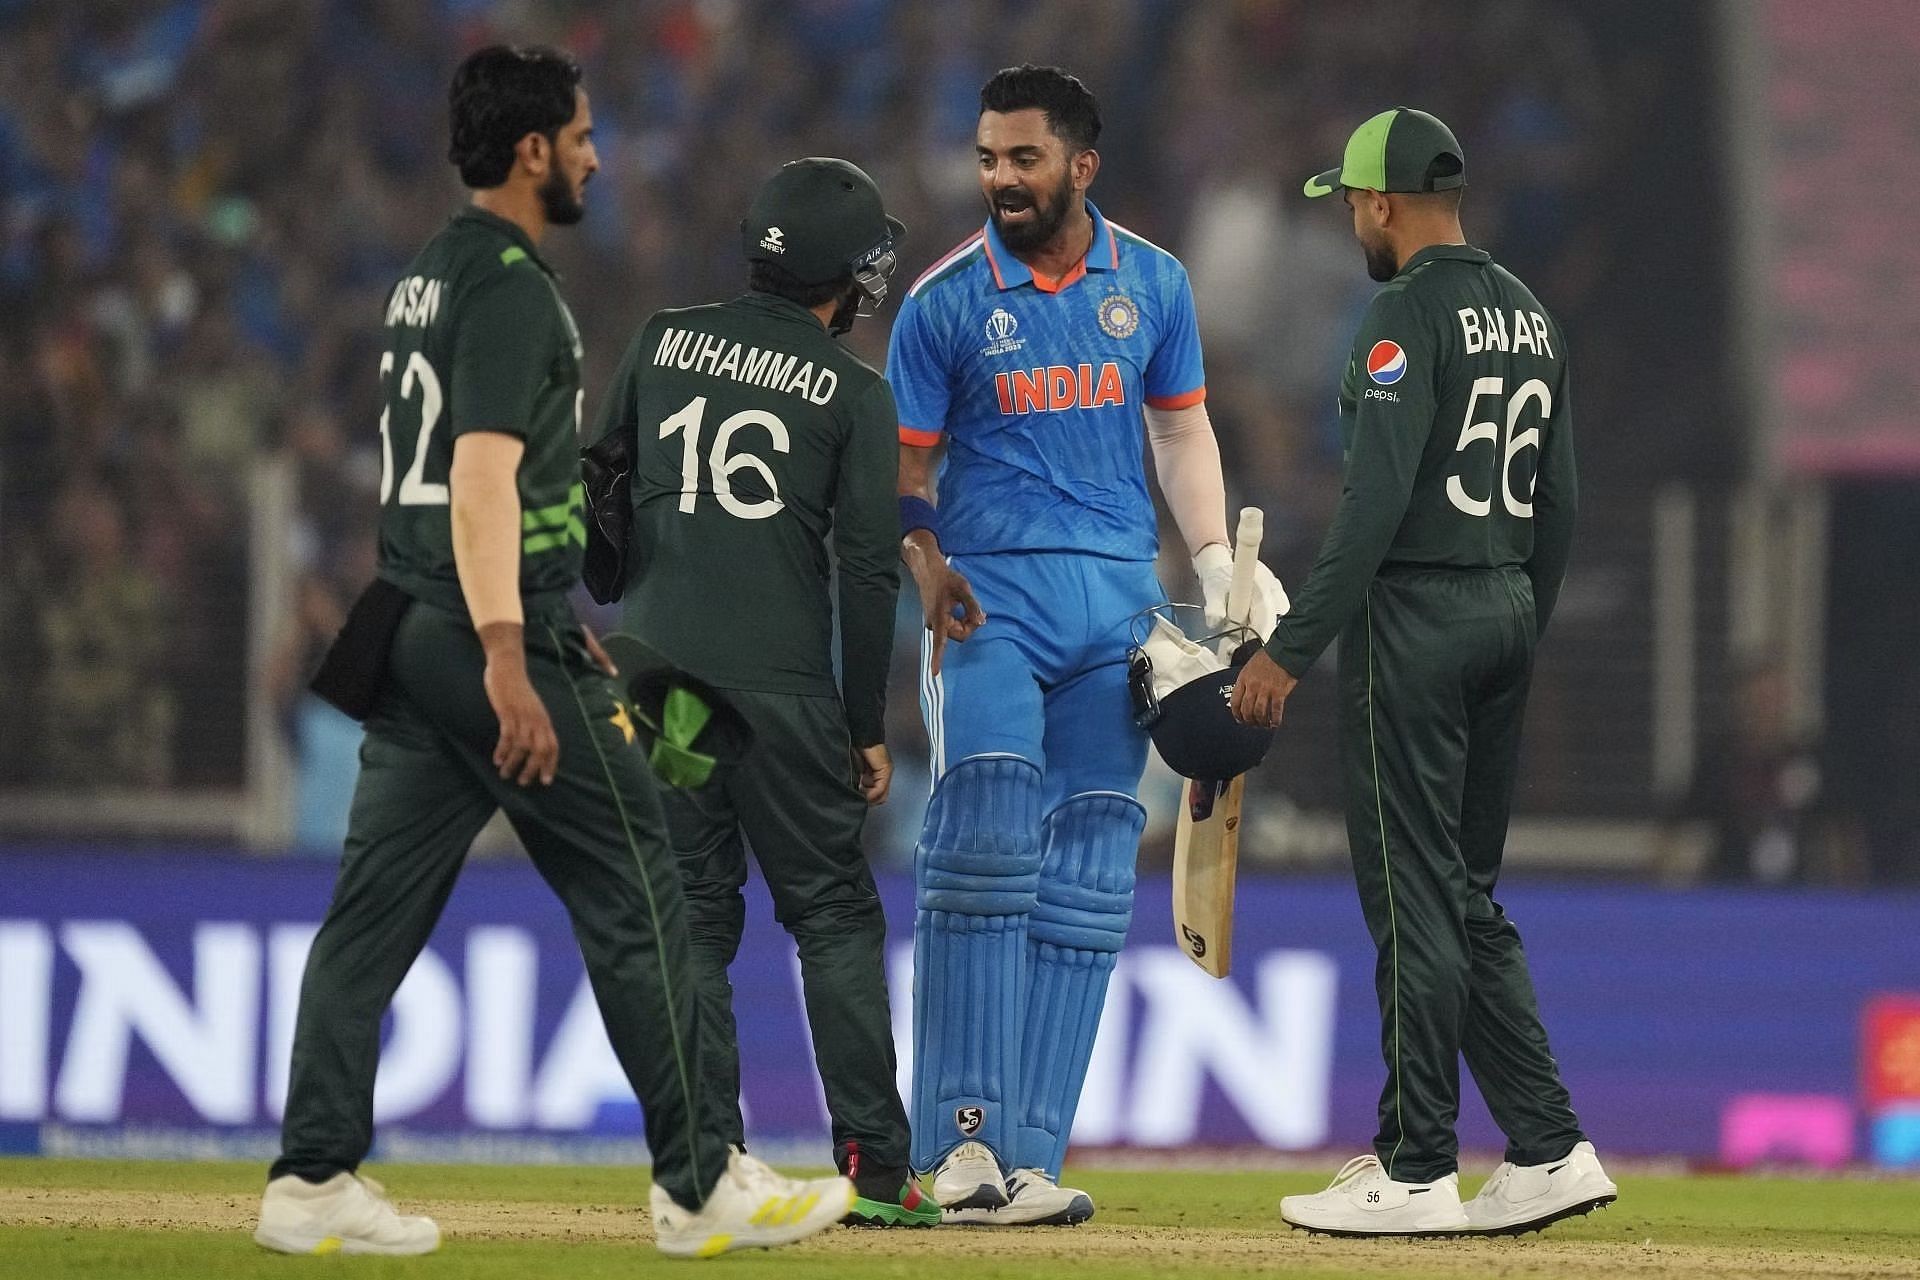 Pakistan lost four consecutive matches after winning their first two games. [P/C: AP]